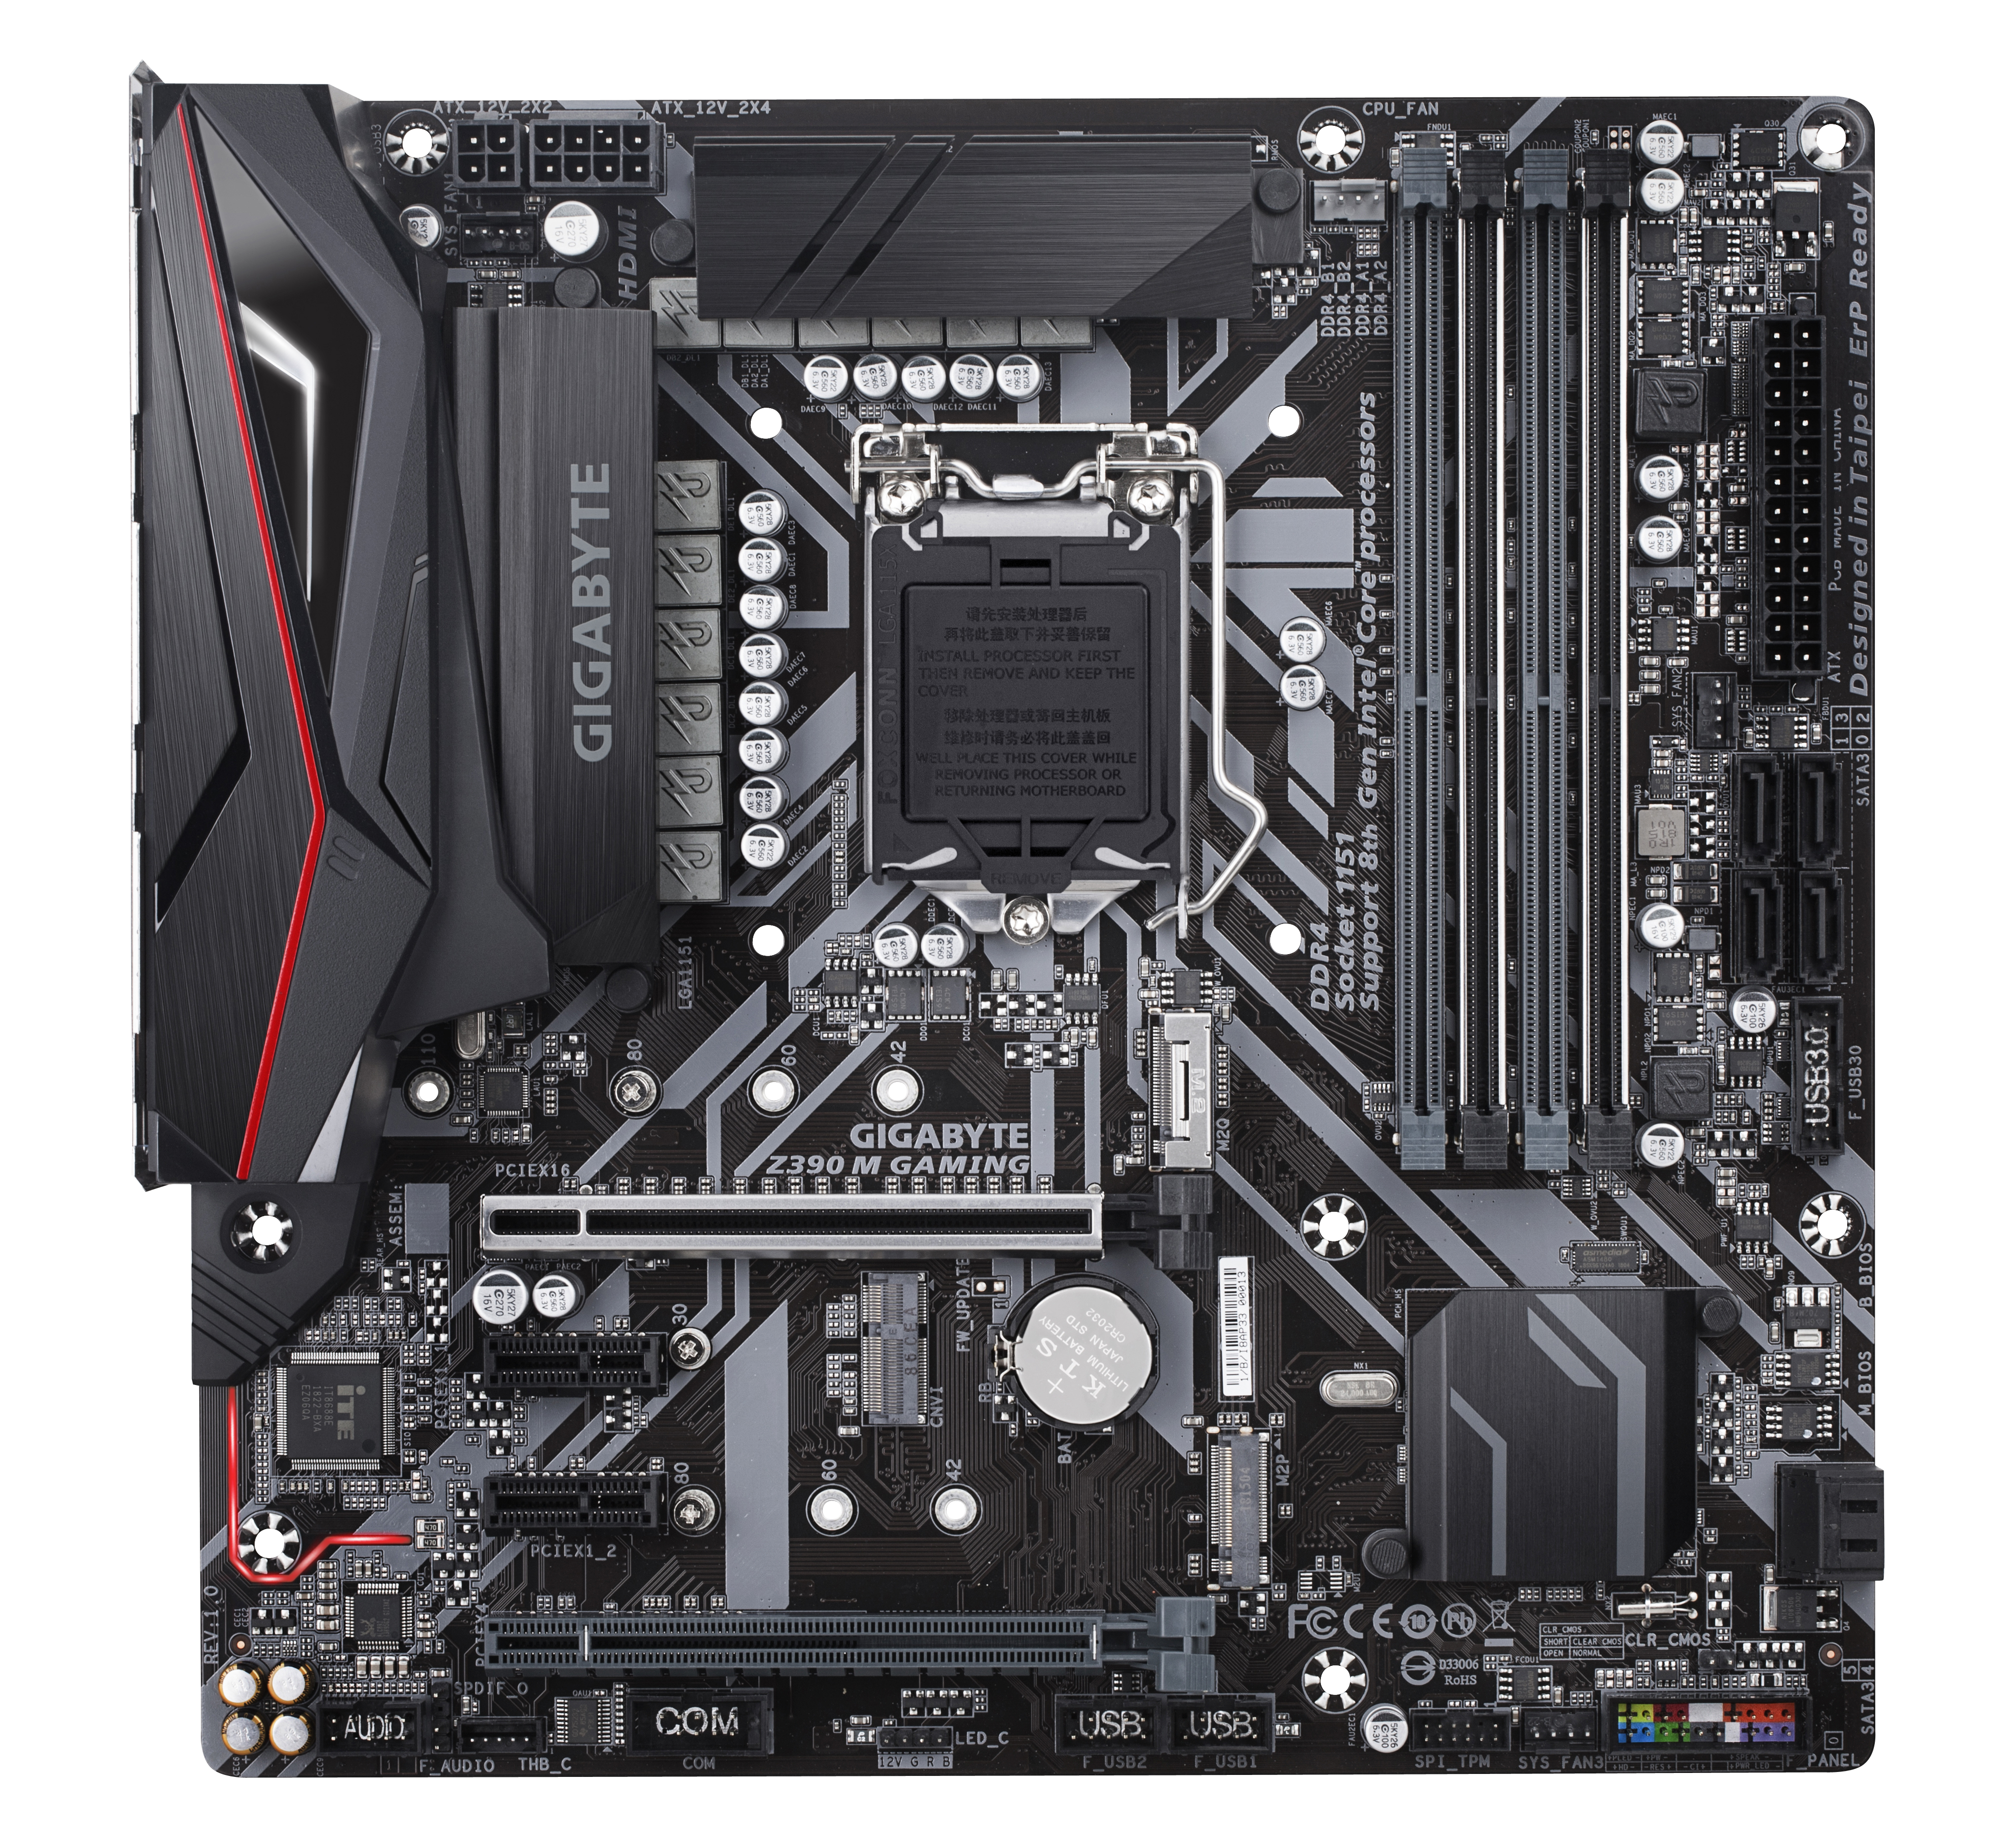 Gigabyte Z390m Gaming Intel Z390 Motherboard Overview 50 Motherboards Analyzed